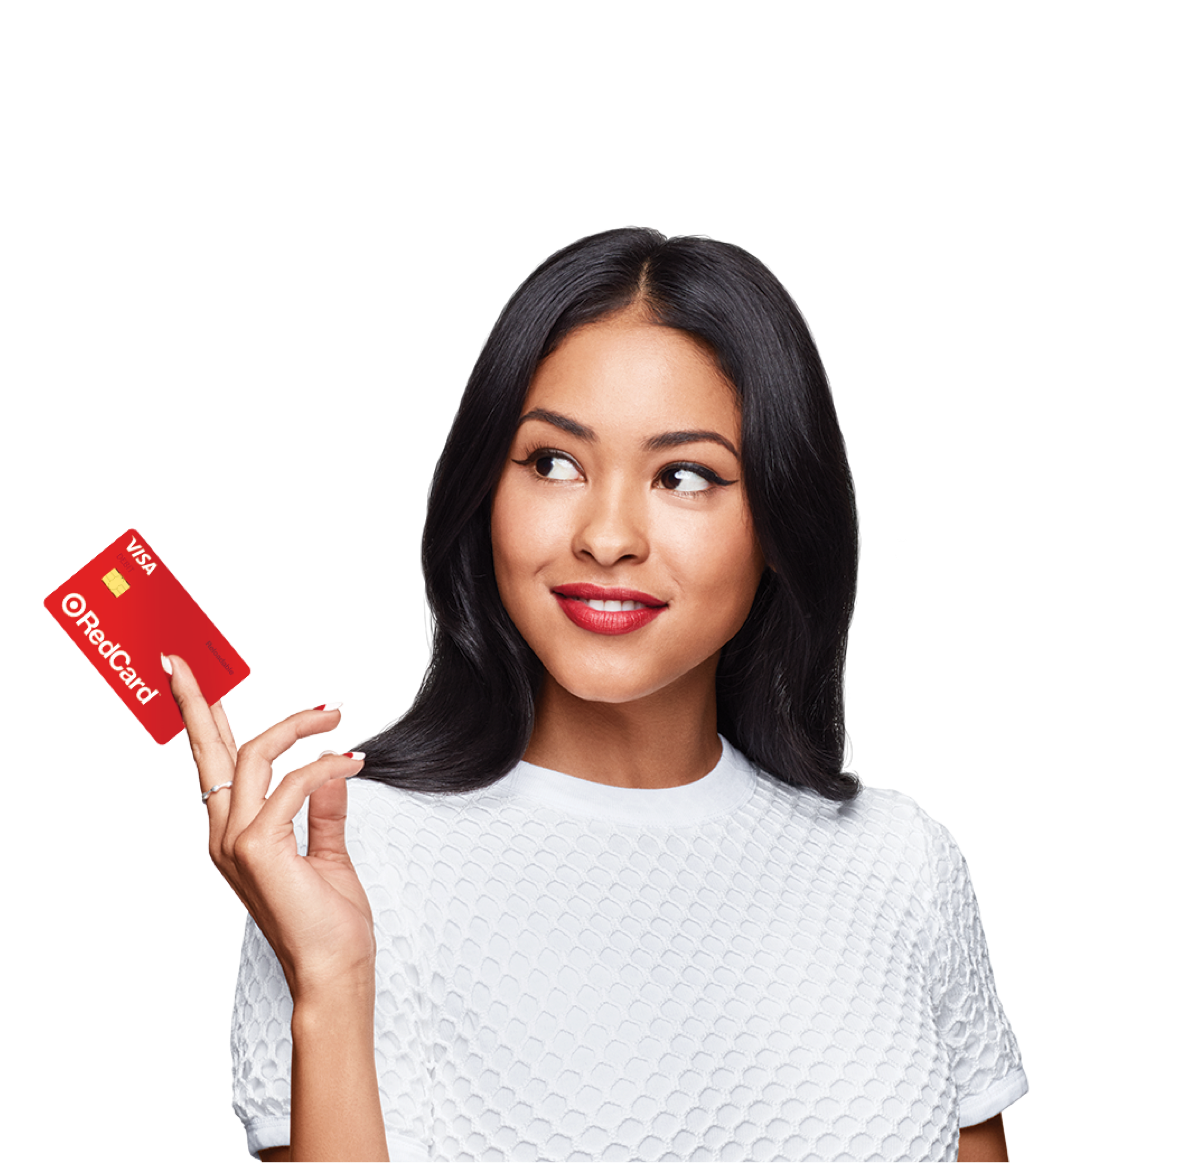 How Does The Target Debit Card Work? [Card Management]